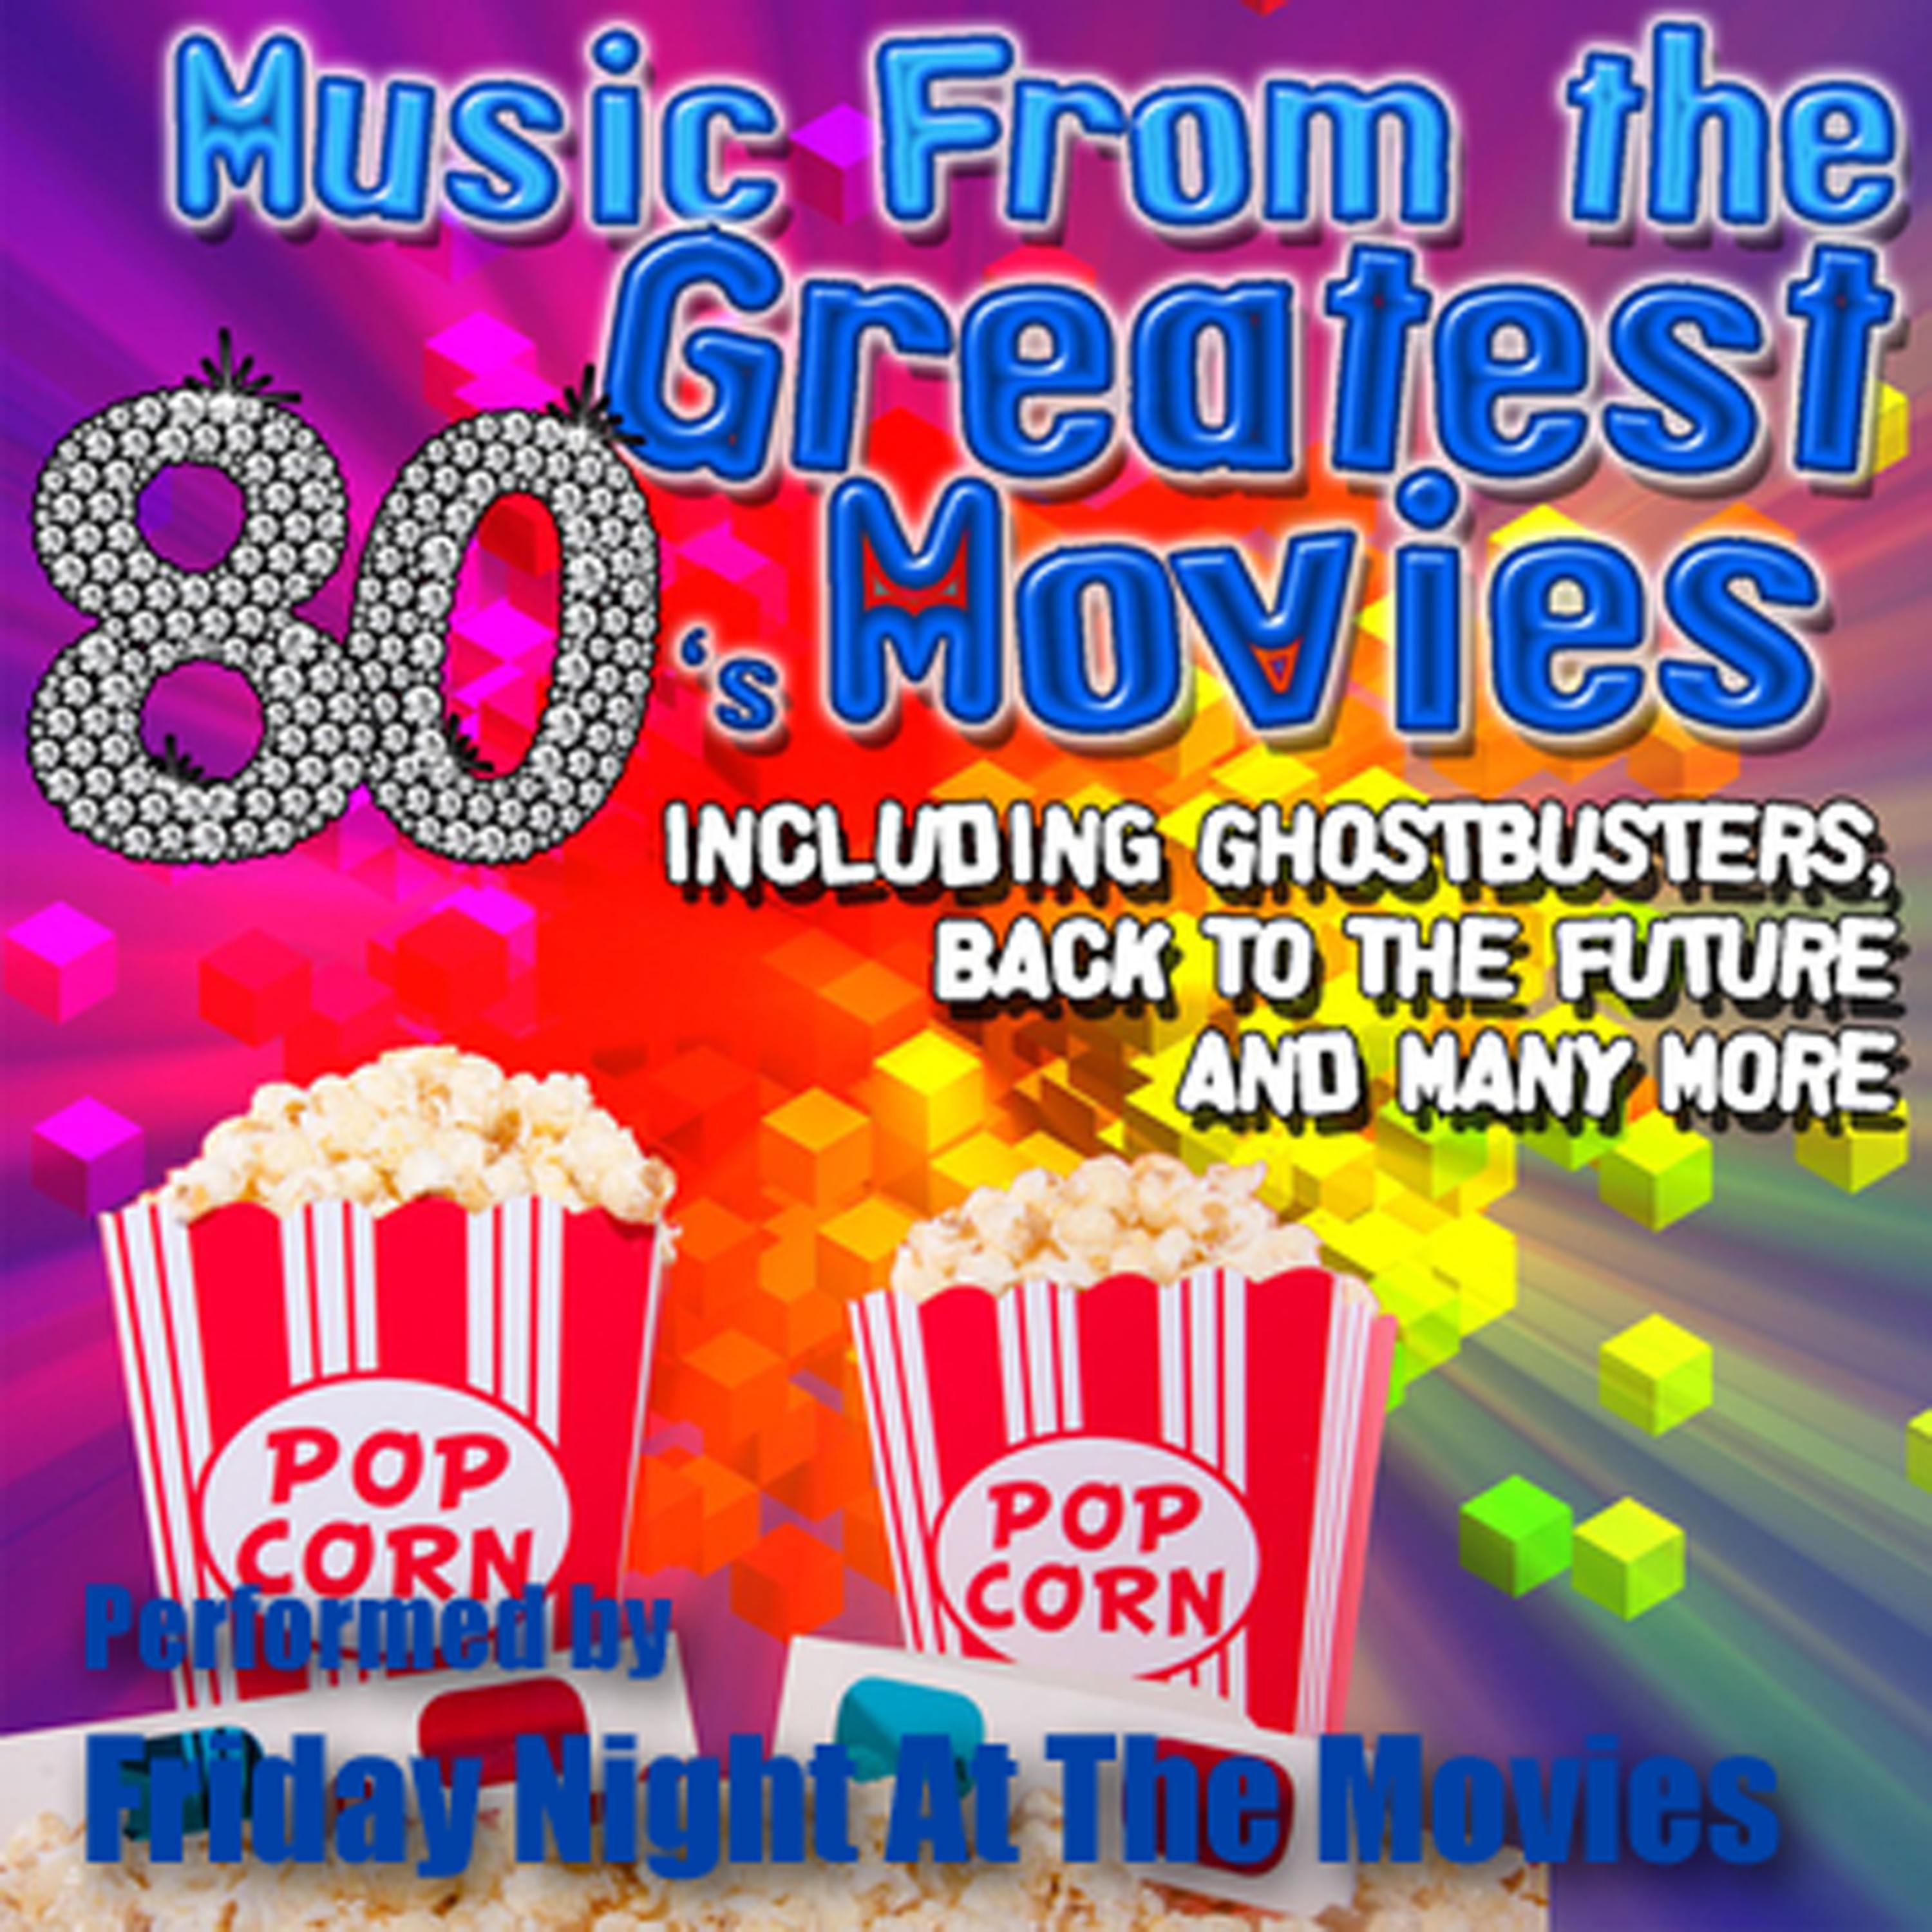 Постер альбома Music From: The Greatest 80's Movies including Ghostbusters, Back To The Future and Many More